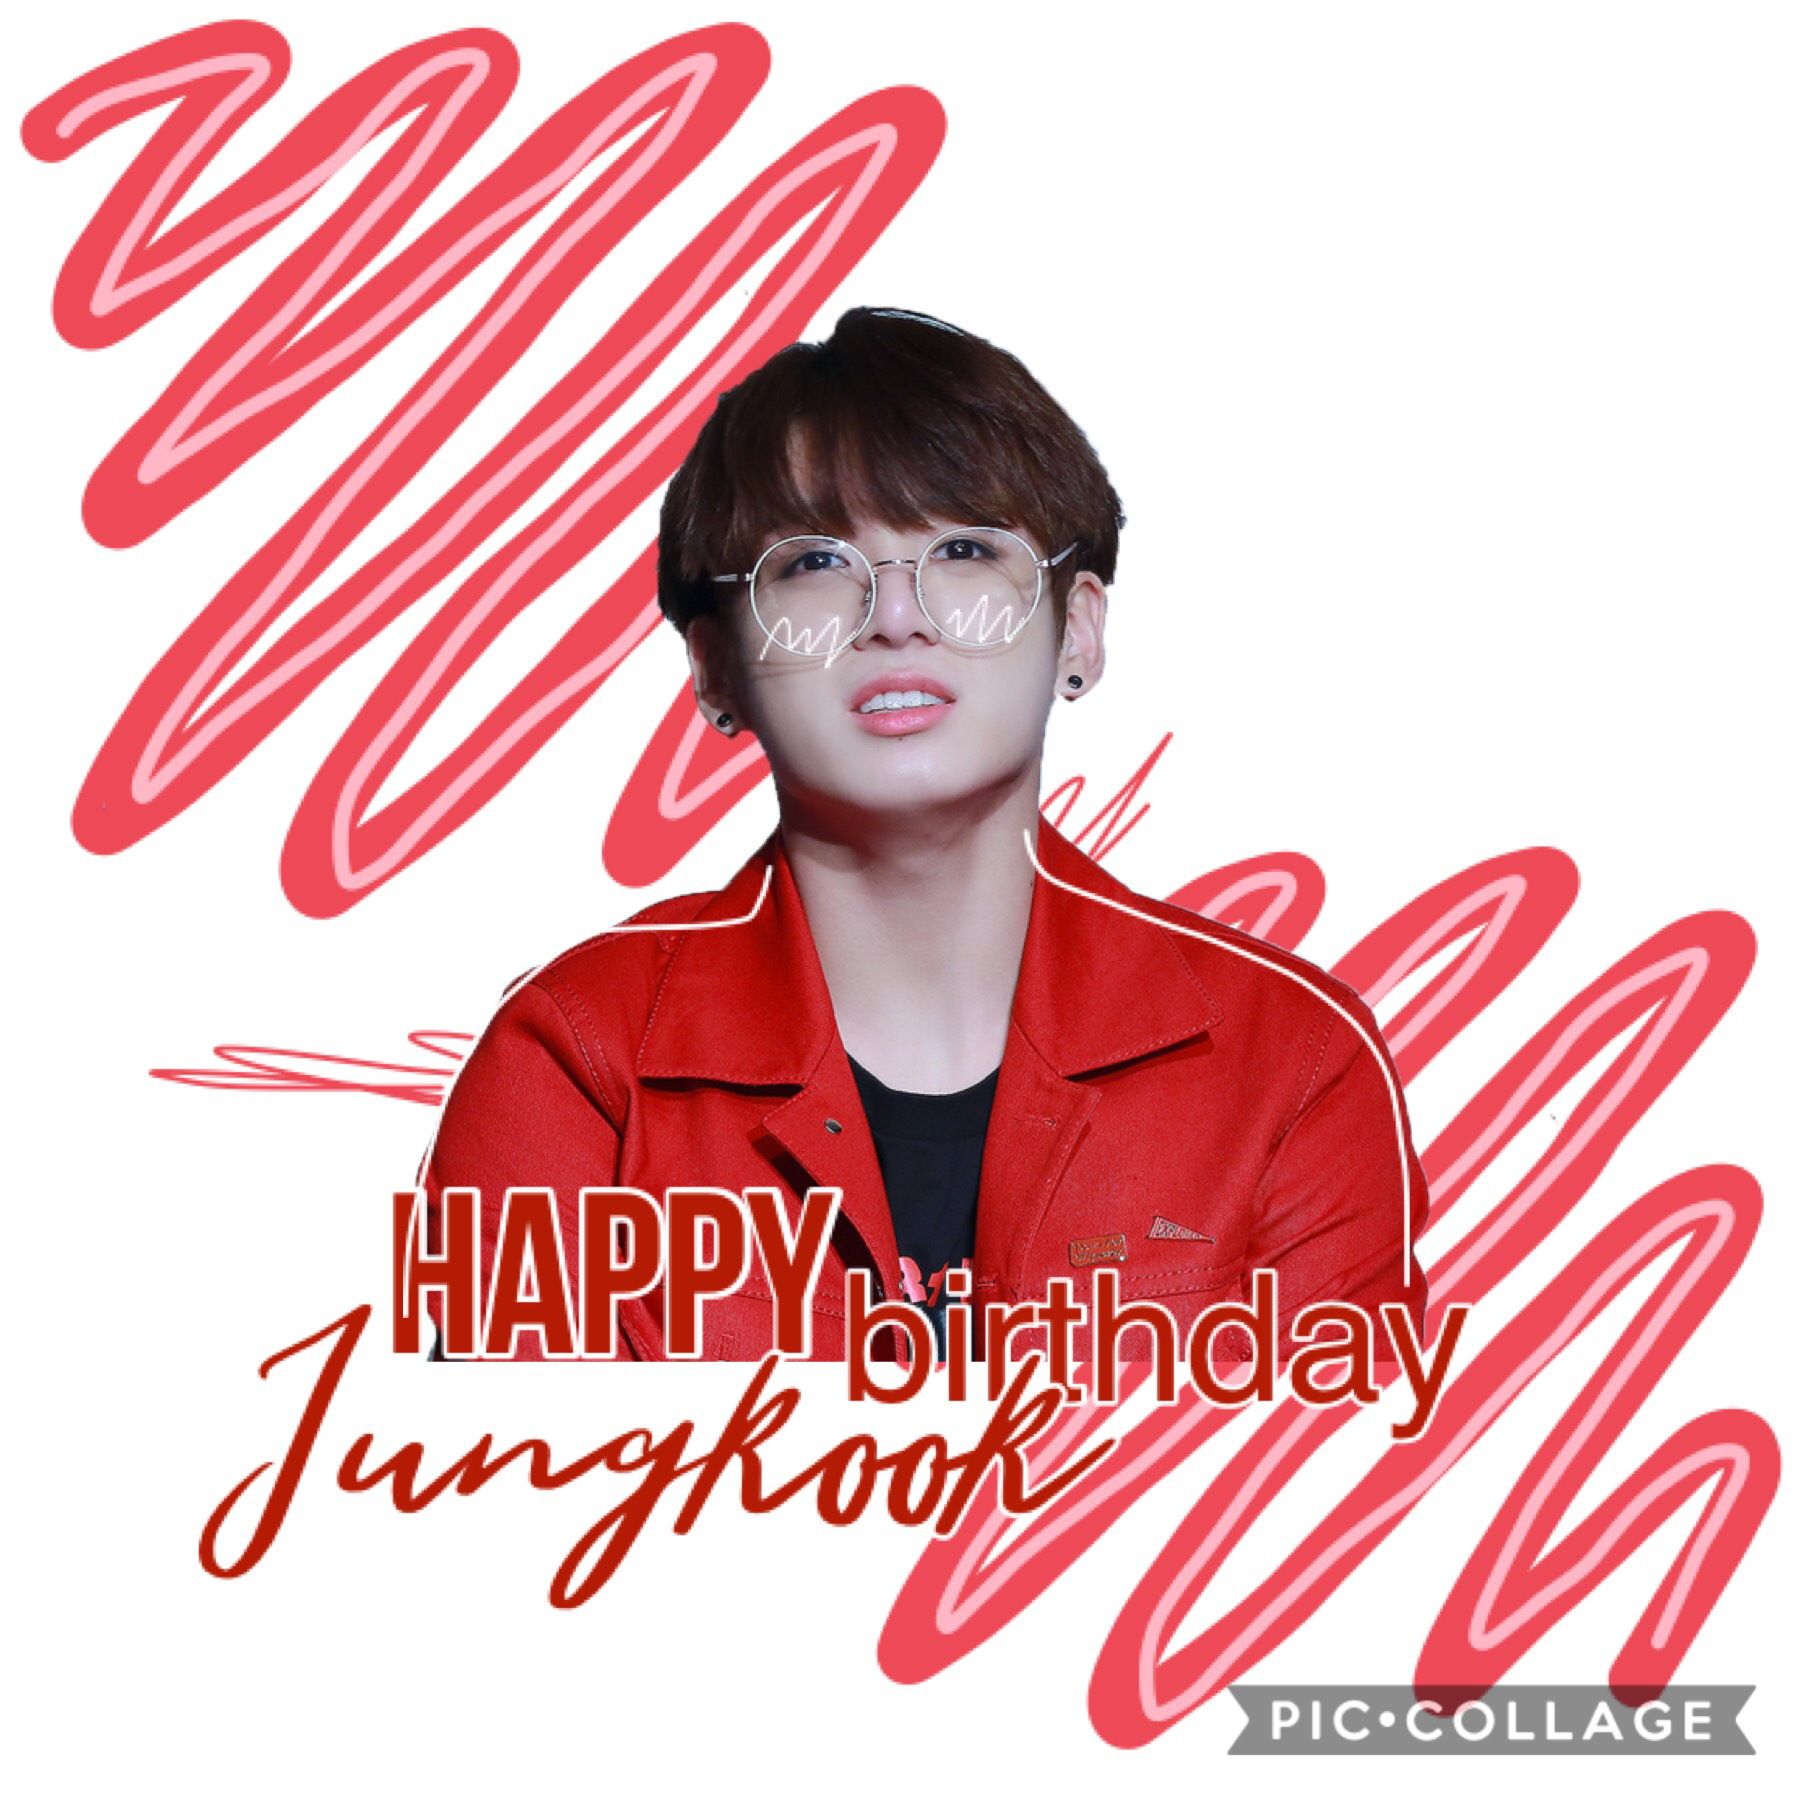 ❤️HAPPY BIRTHDAY JUNGKOOK, you are so precious, ARMY don’t deserve you. Have a good day!💜💜💜